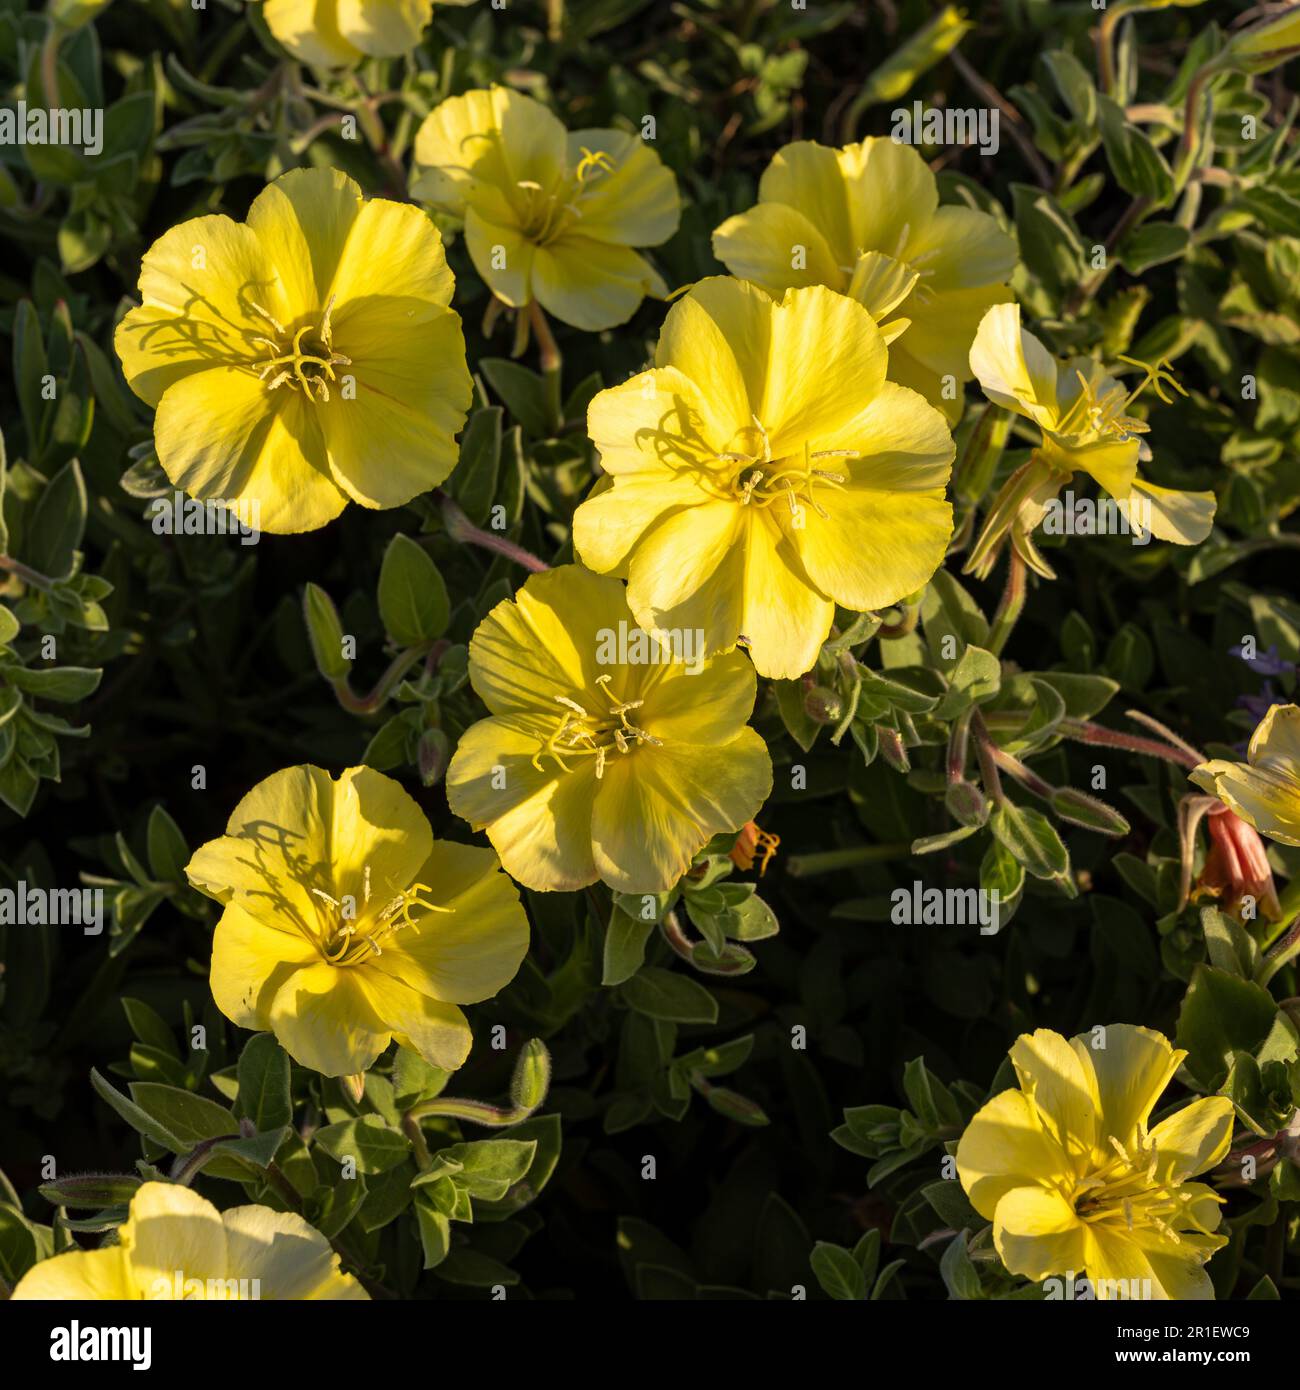 Oenothera drummondii is species of shrub in the family Onagraceae. They have a self-supporting growth form. They are native to The Contiguous United S Stock Photo